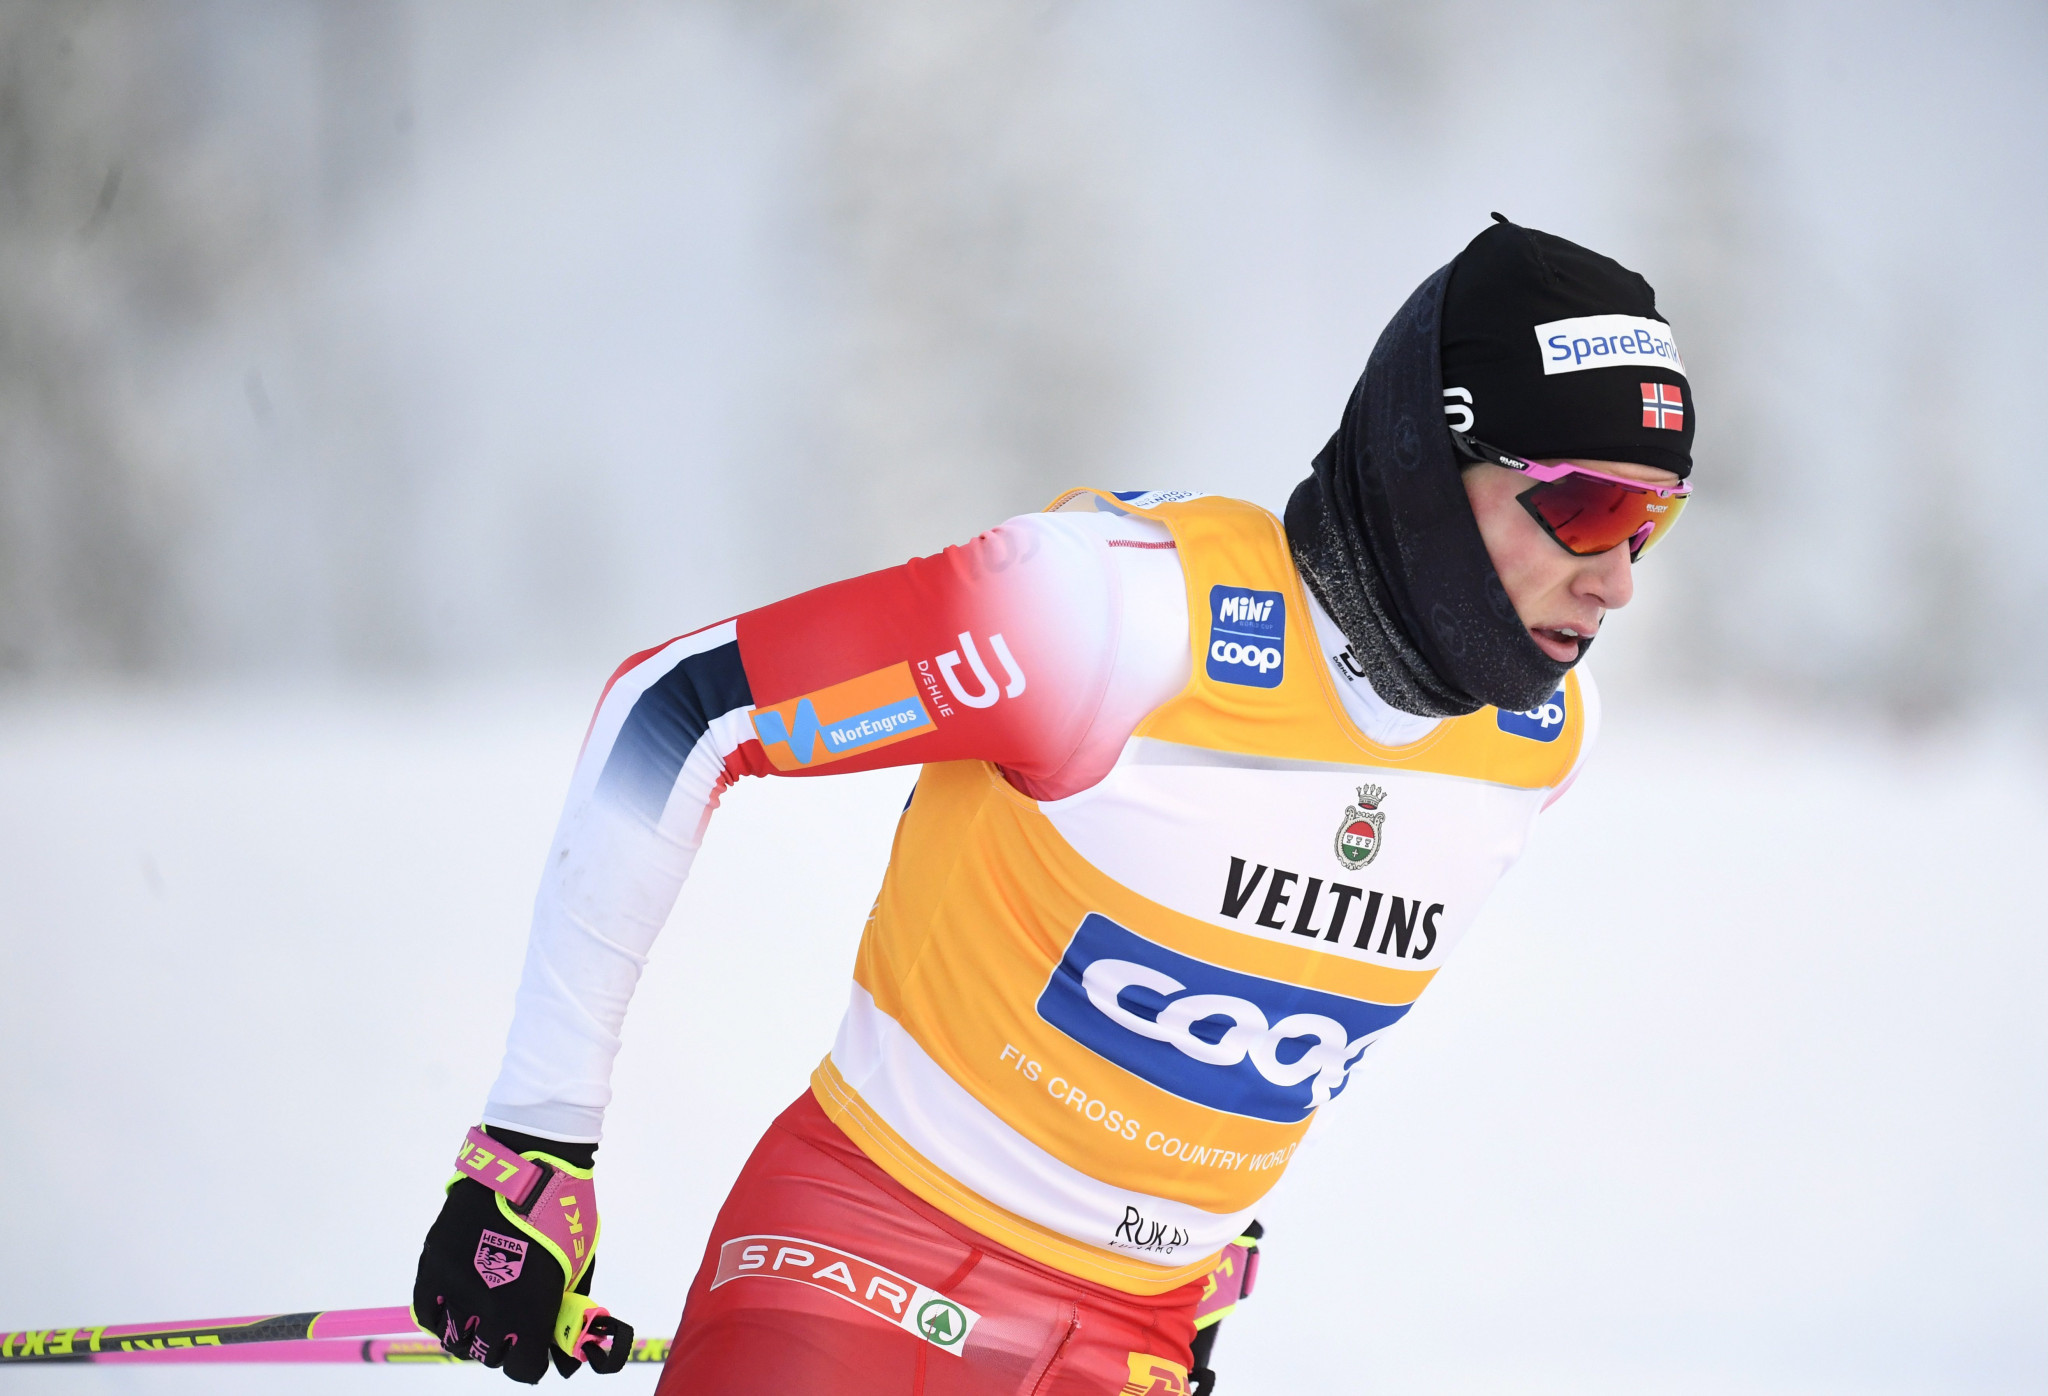 Johannes Høsflot Klæbo of Norway is aiming for a home victory at the FIS Cross-Country World Cup event in Lillehammer ©Getty Images